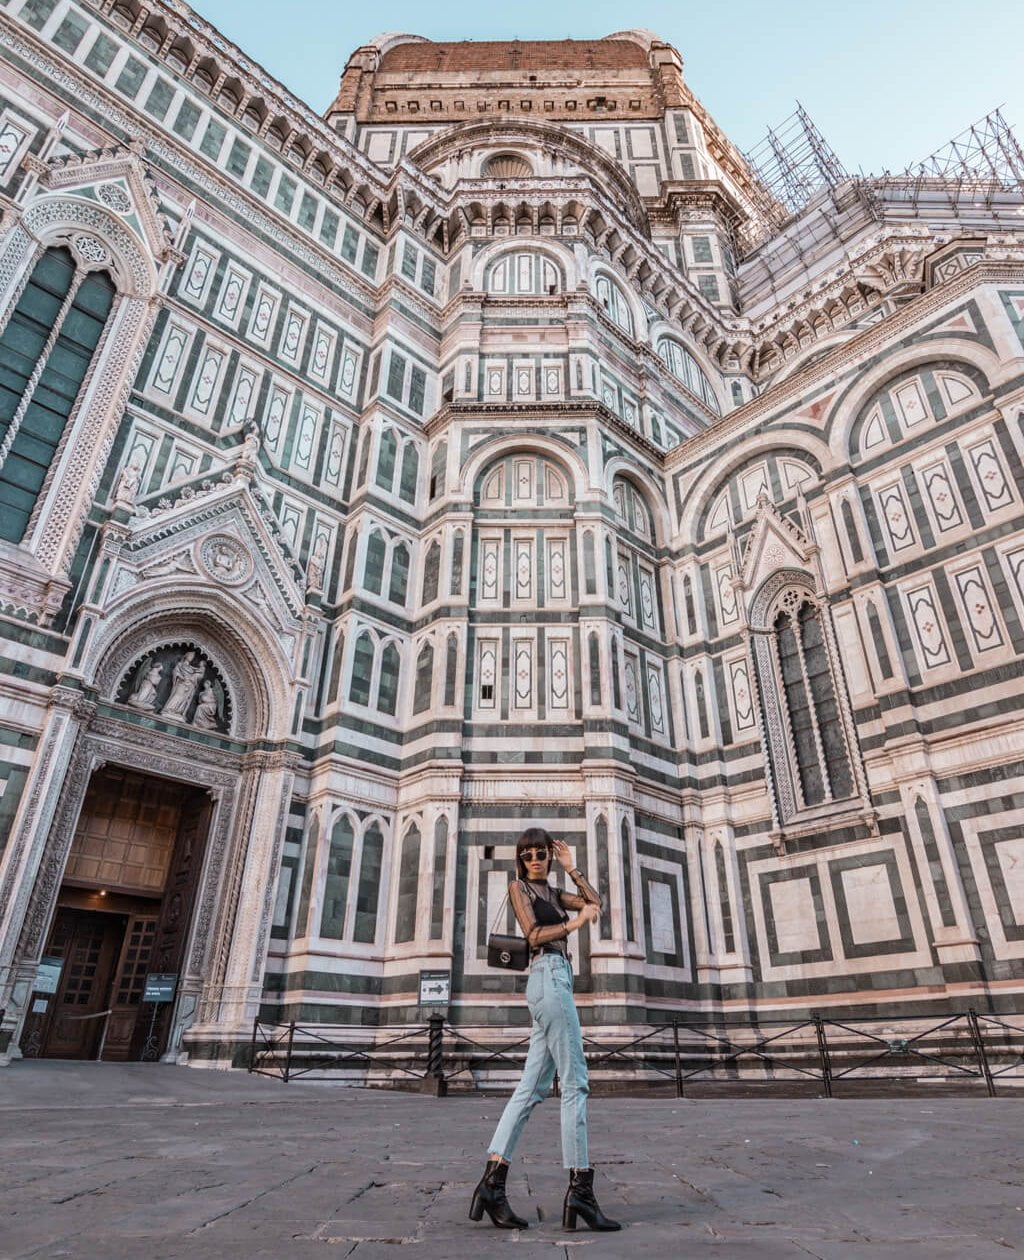 Instagram Outfits Round Up: Traveling In Italy